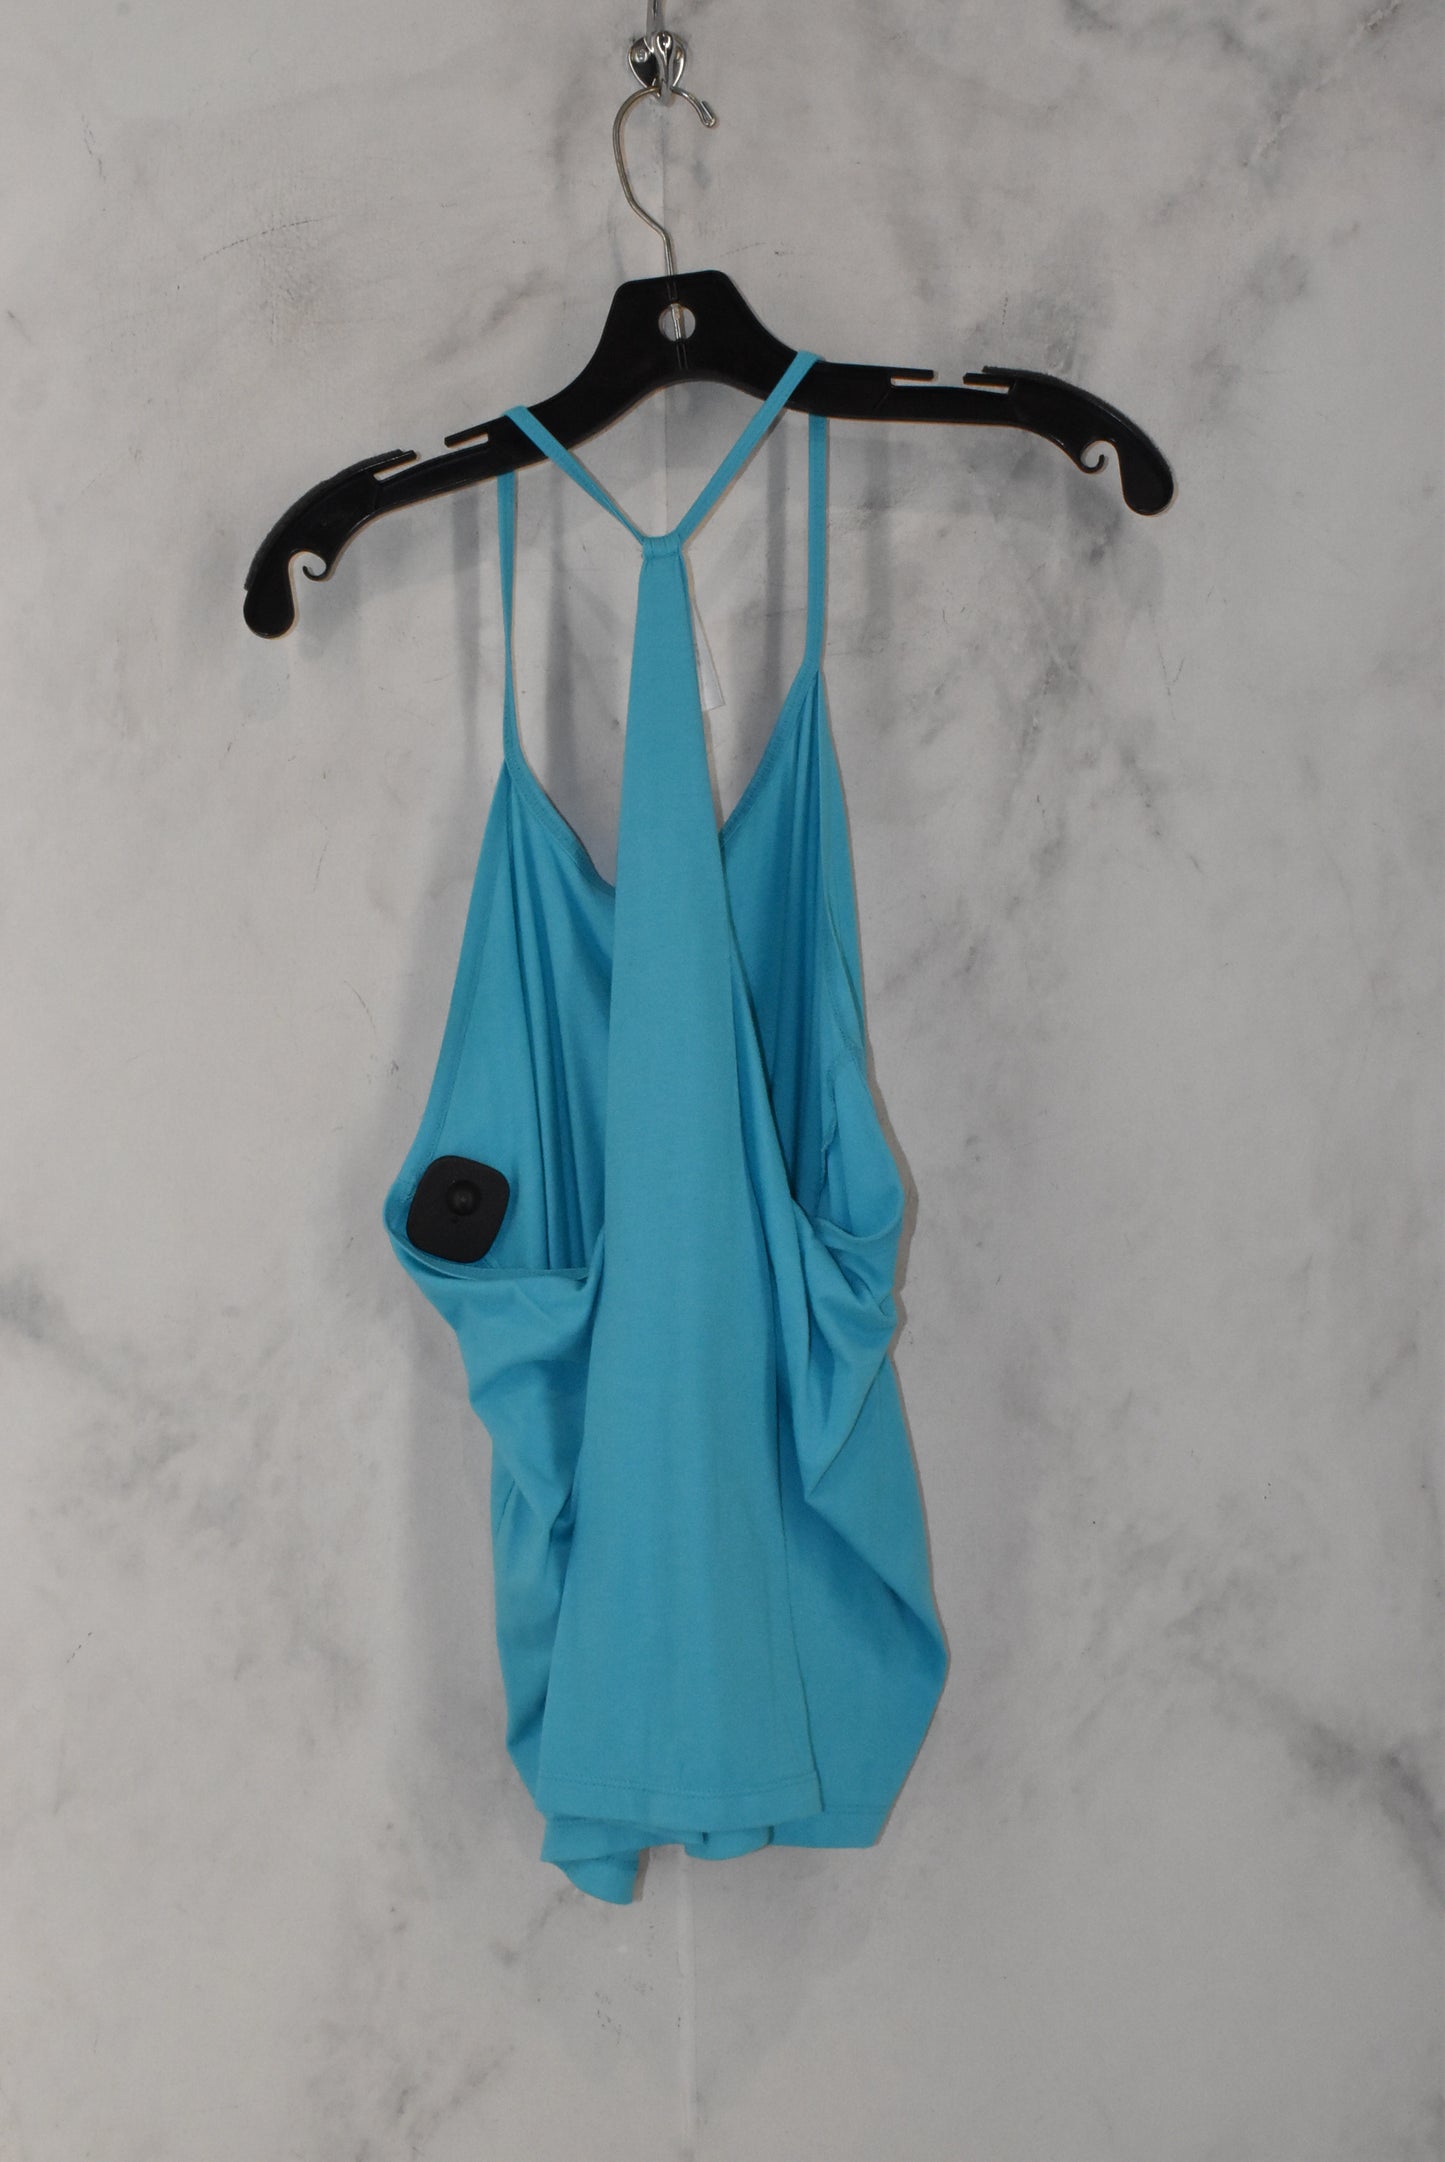 Athletic Tank Top By Fabletics  Size: M